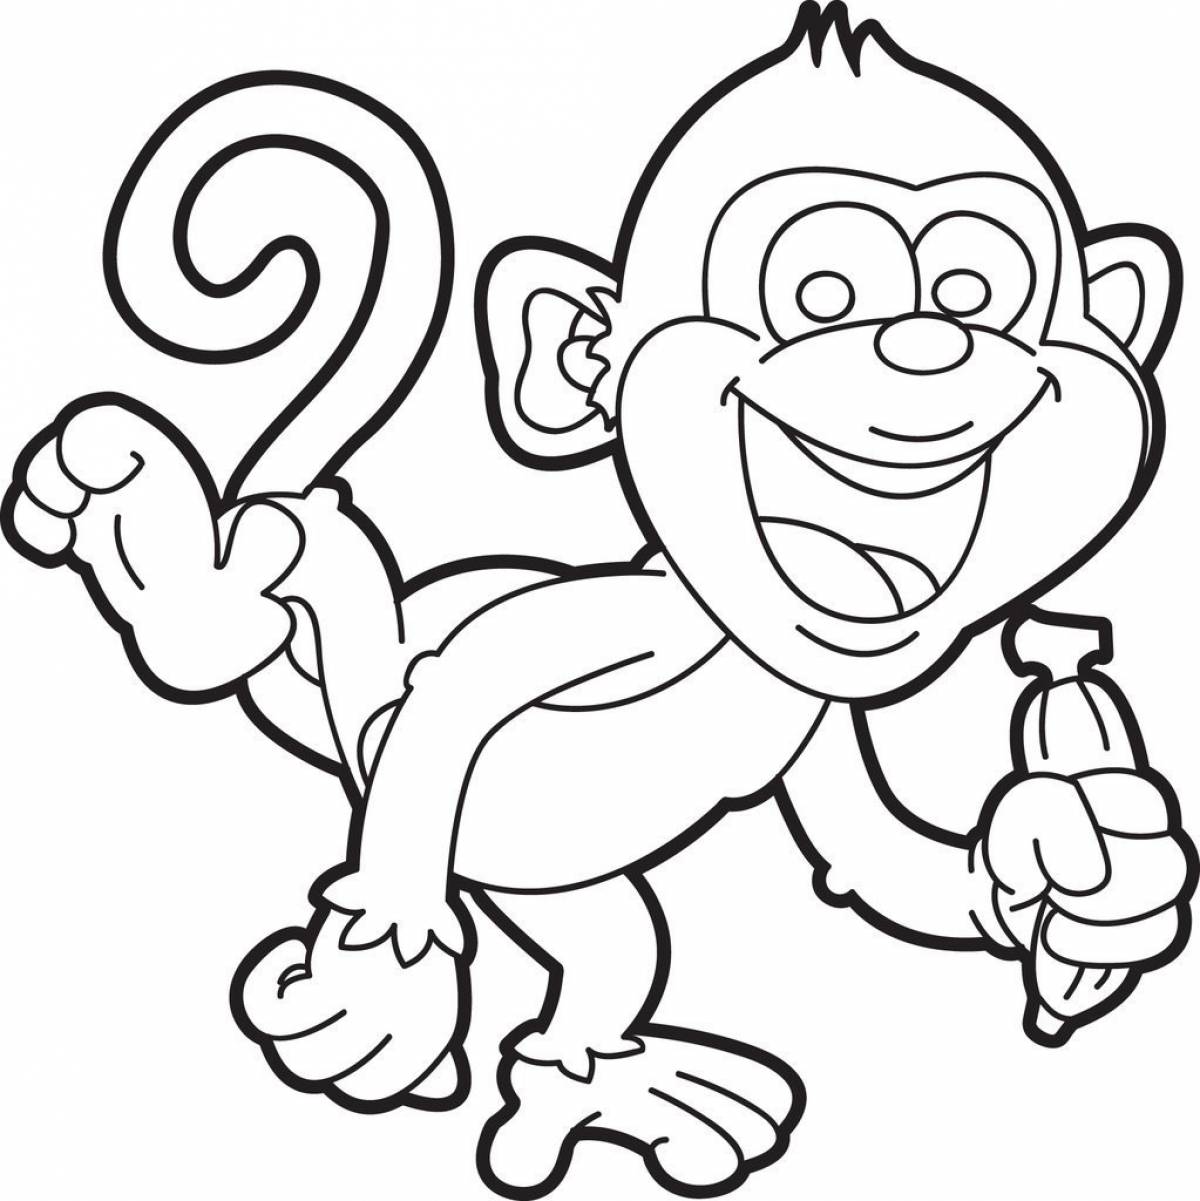 Great ape coloring page